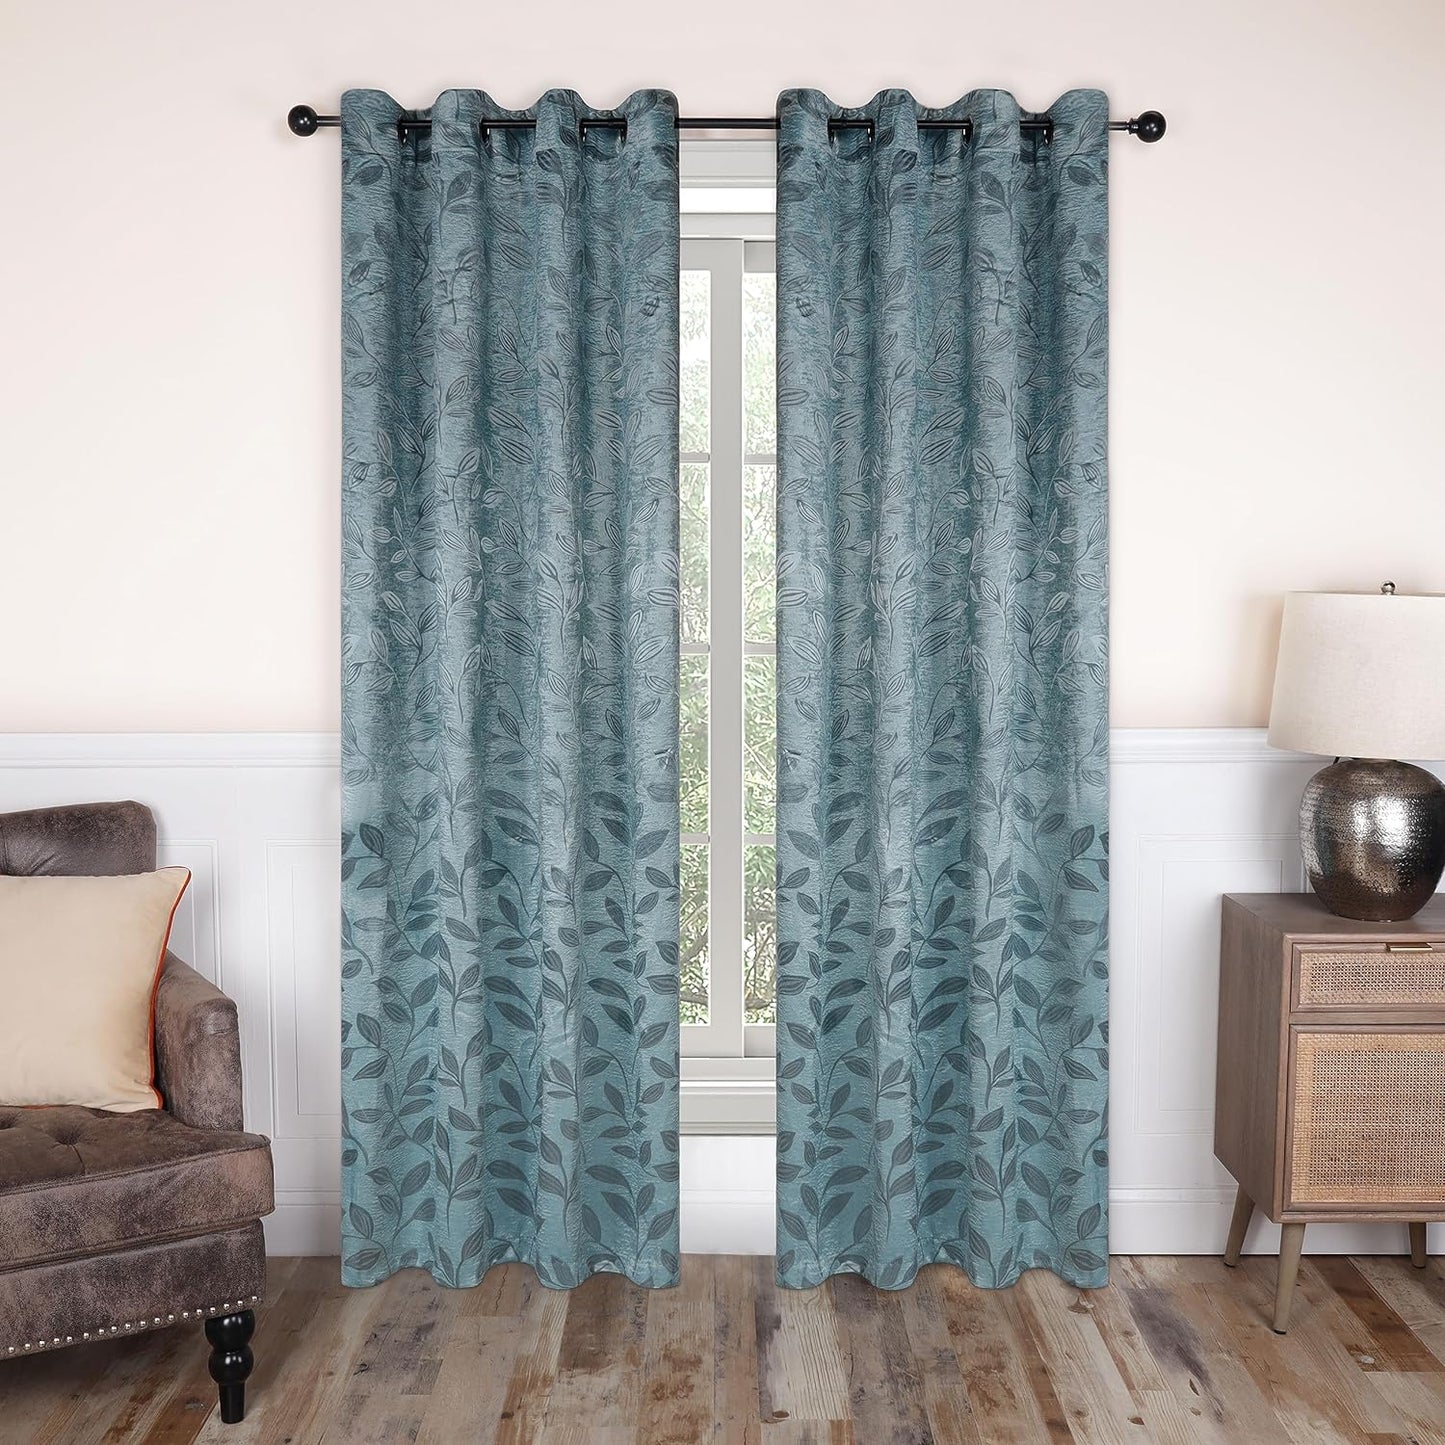 Superior Blackout Curtains, Room Darkening Window Accent for Bedroom, Sun Blocking, Thermal, Modern Bohemian Curtains, Leaves Collection, Set of 2 Panels, Rod Pocket - 52 in X 63 In, Nickel Black  Home City Inc. Green Lily 52 In X 120 In (W X L) 